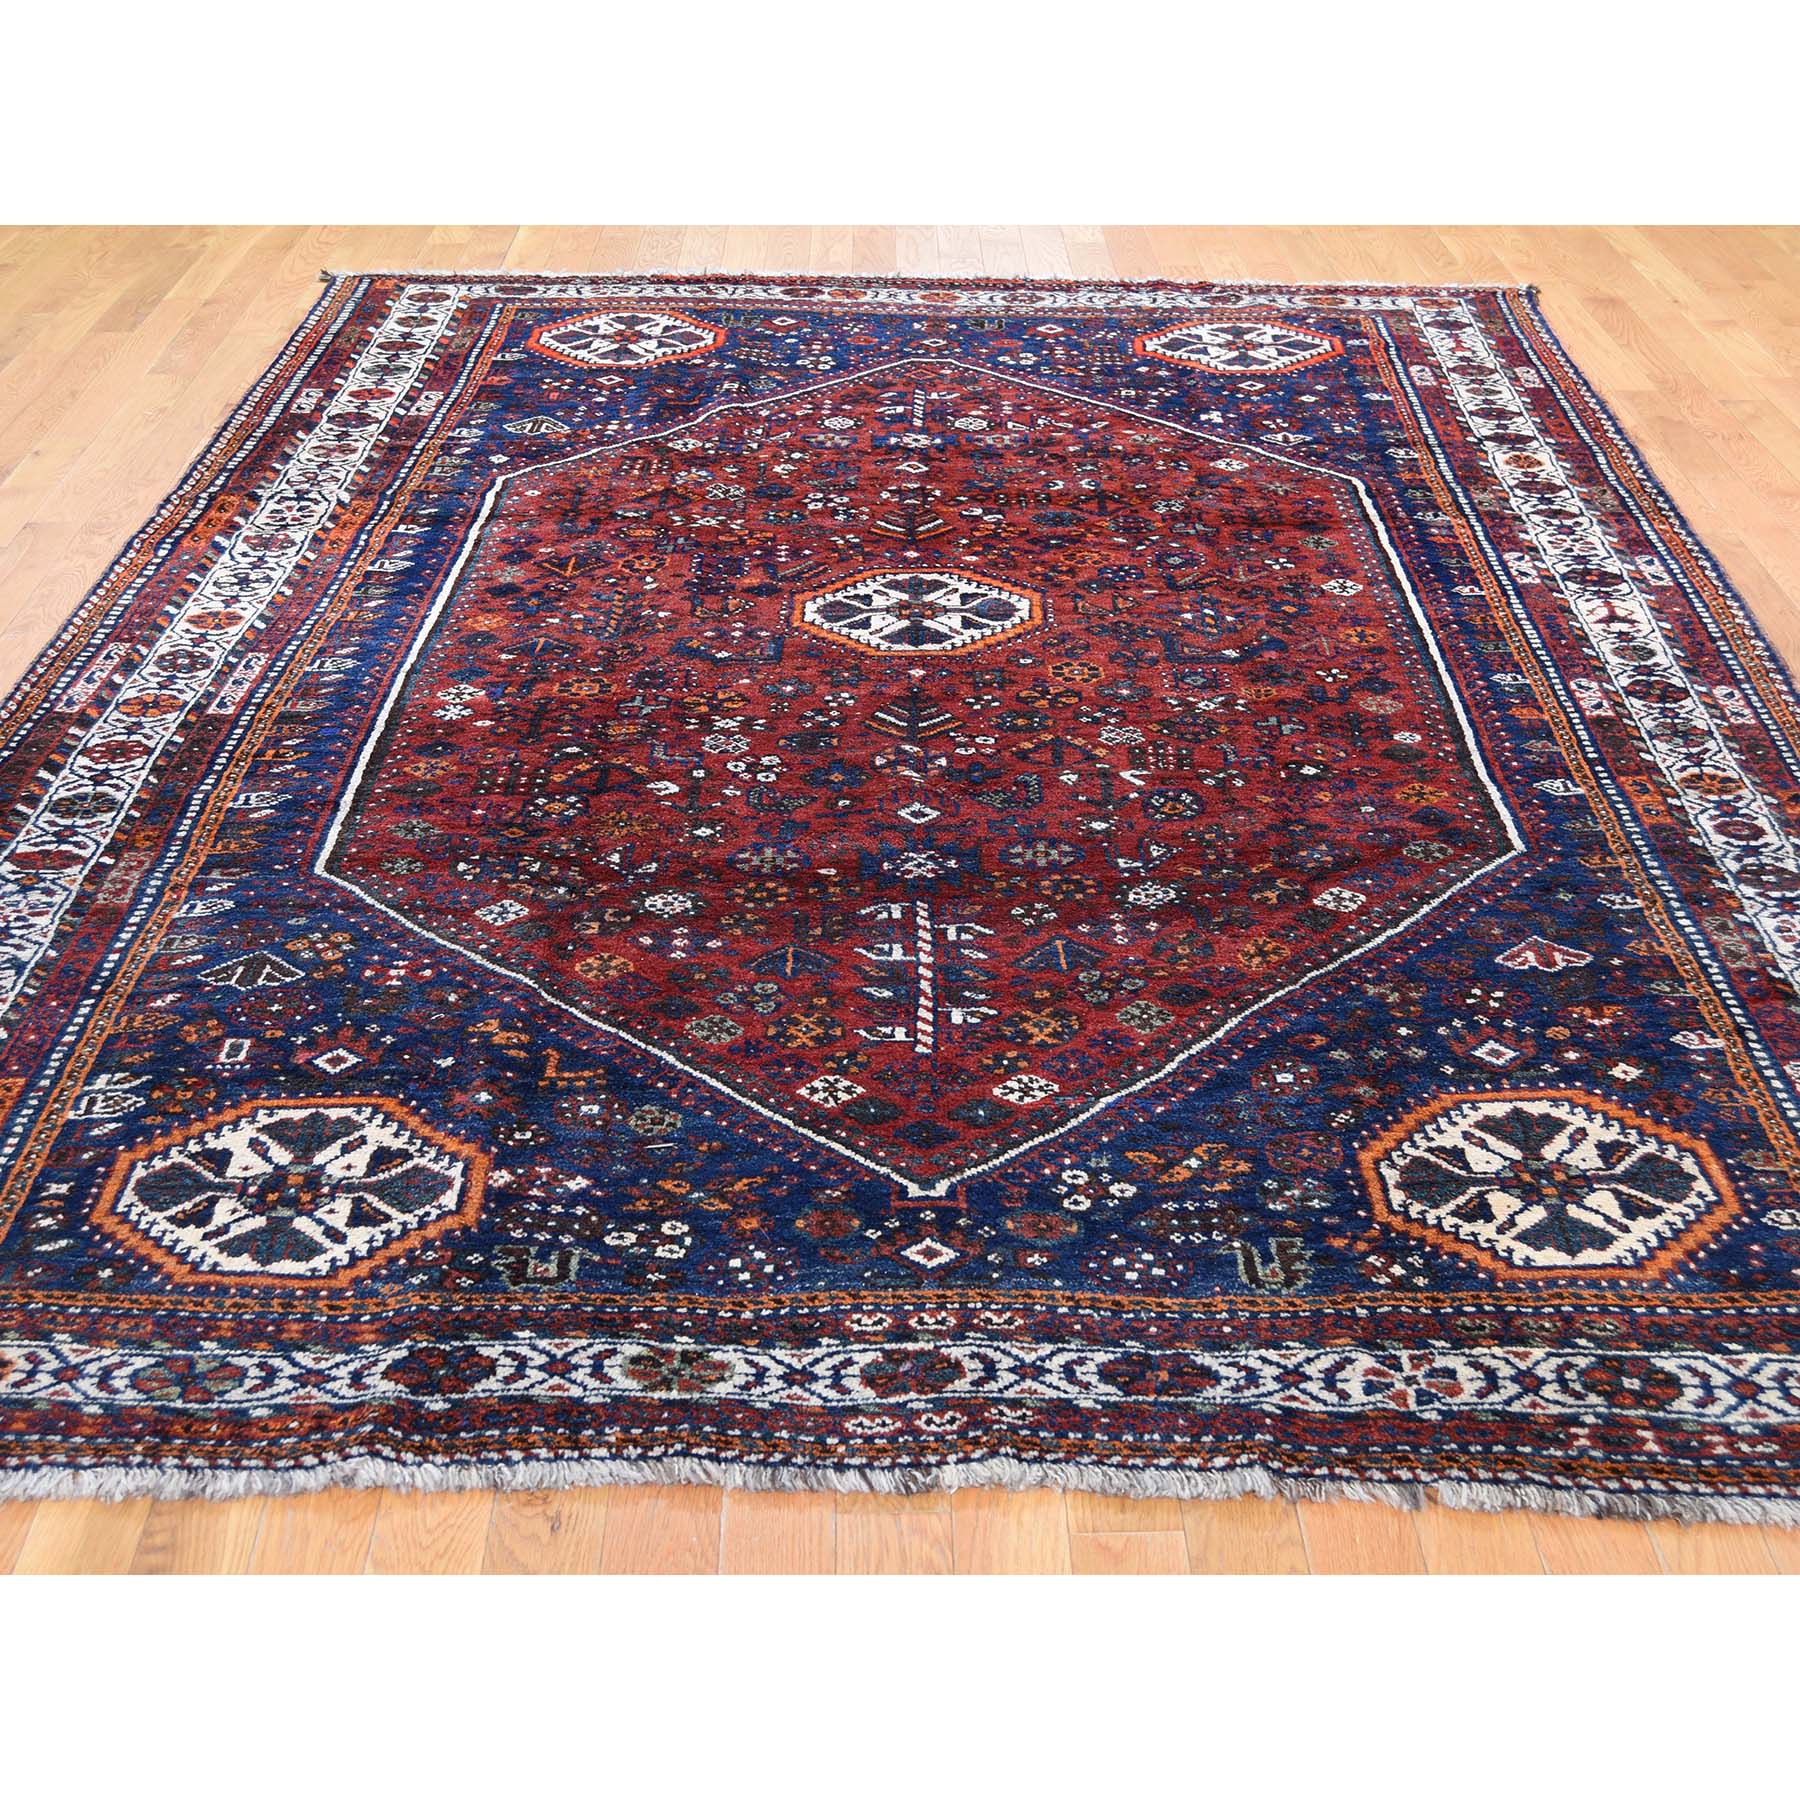 7-2 x10-2  Red New persian Shiraz Pure Wool Hand-Knotted Oriental Rug 